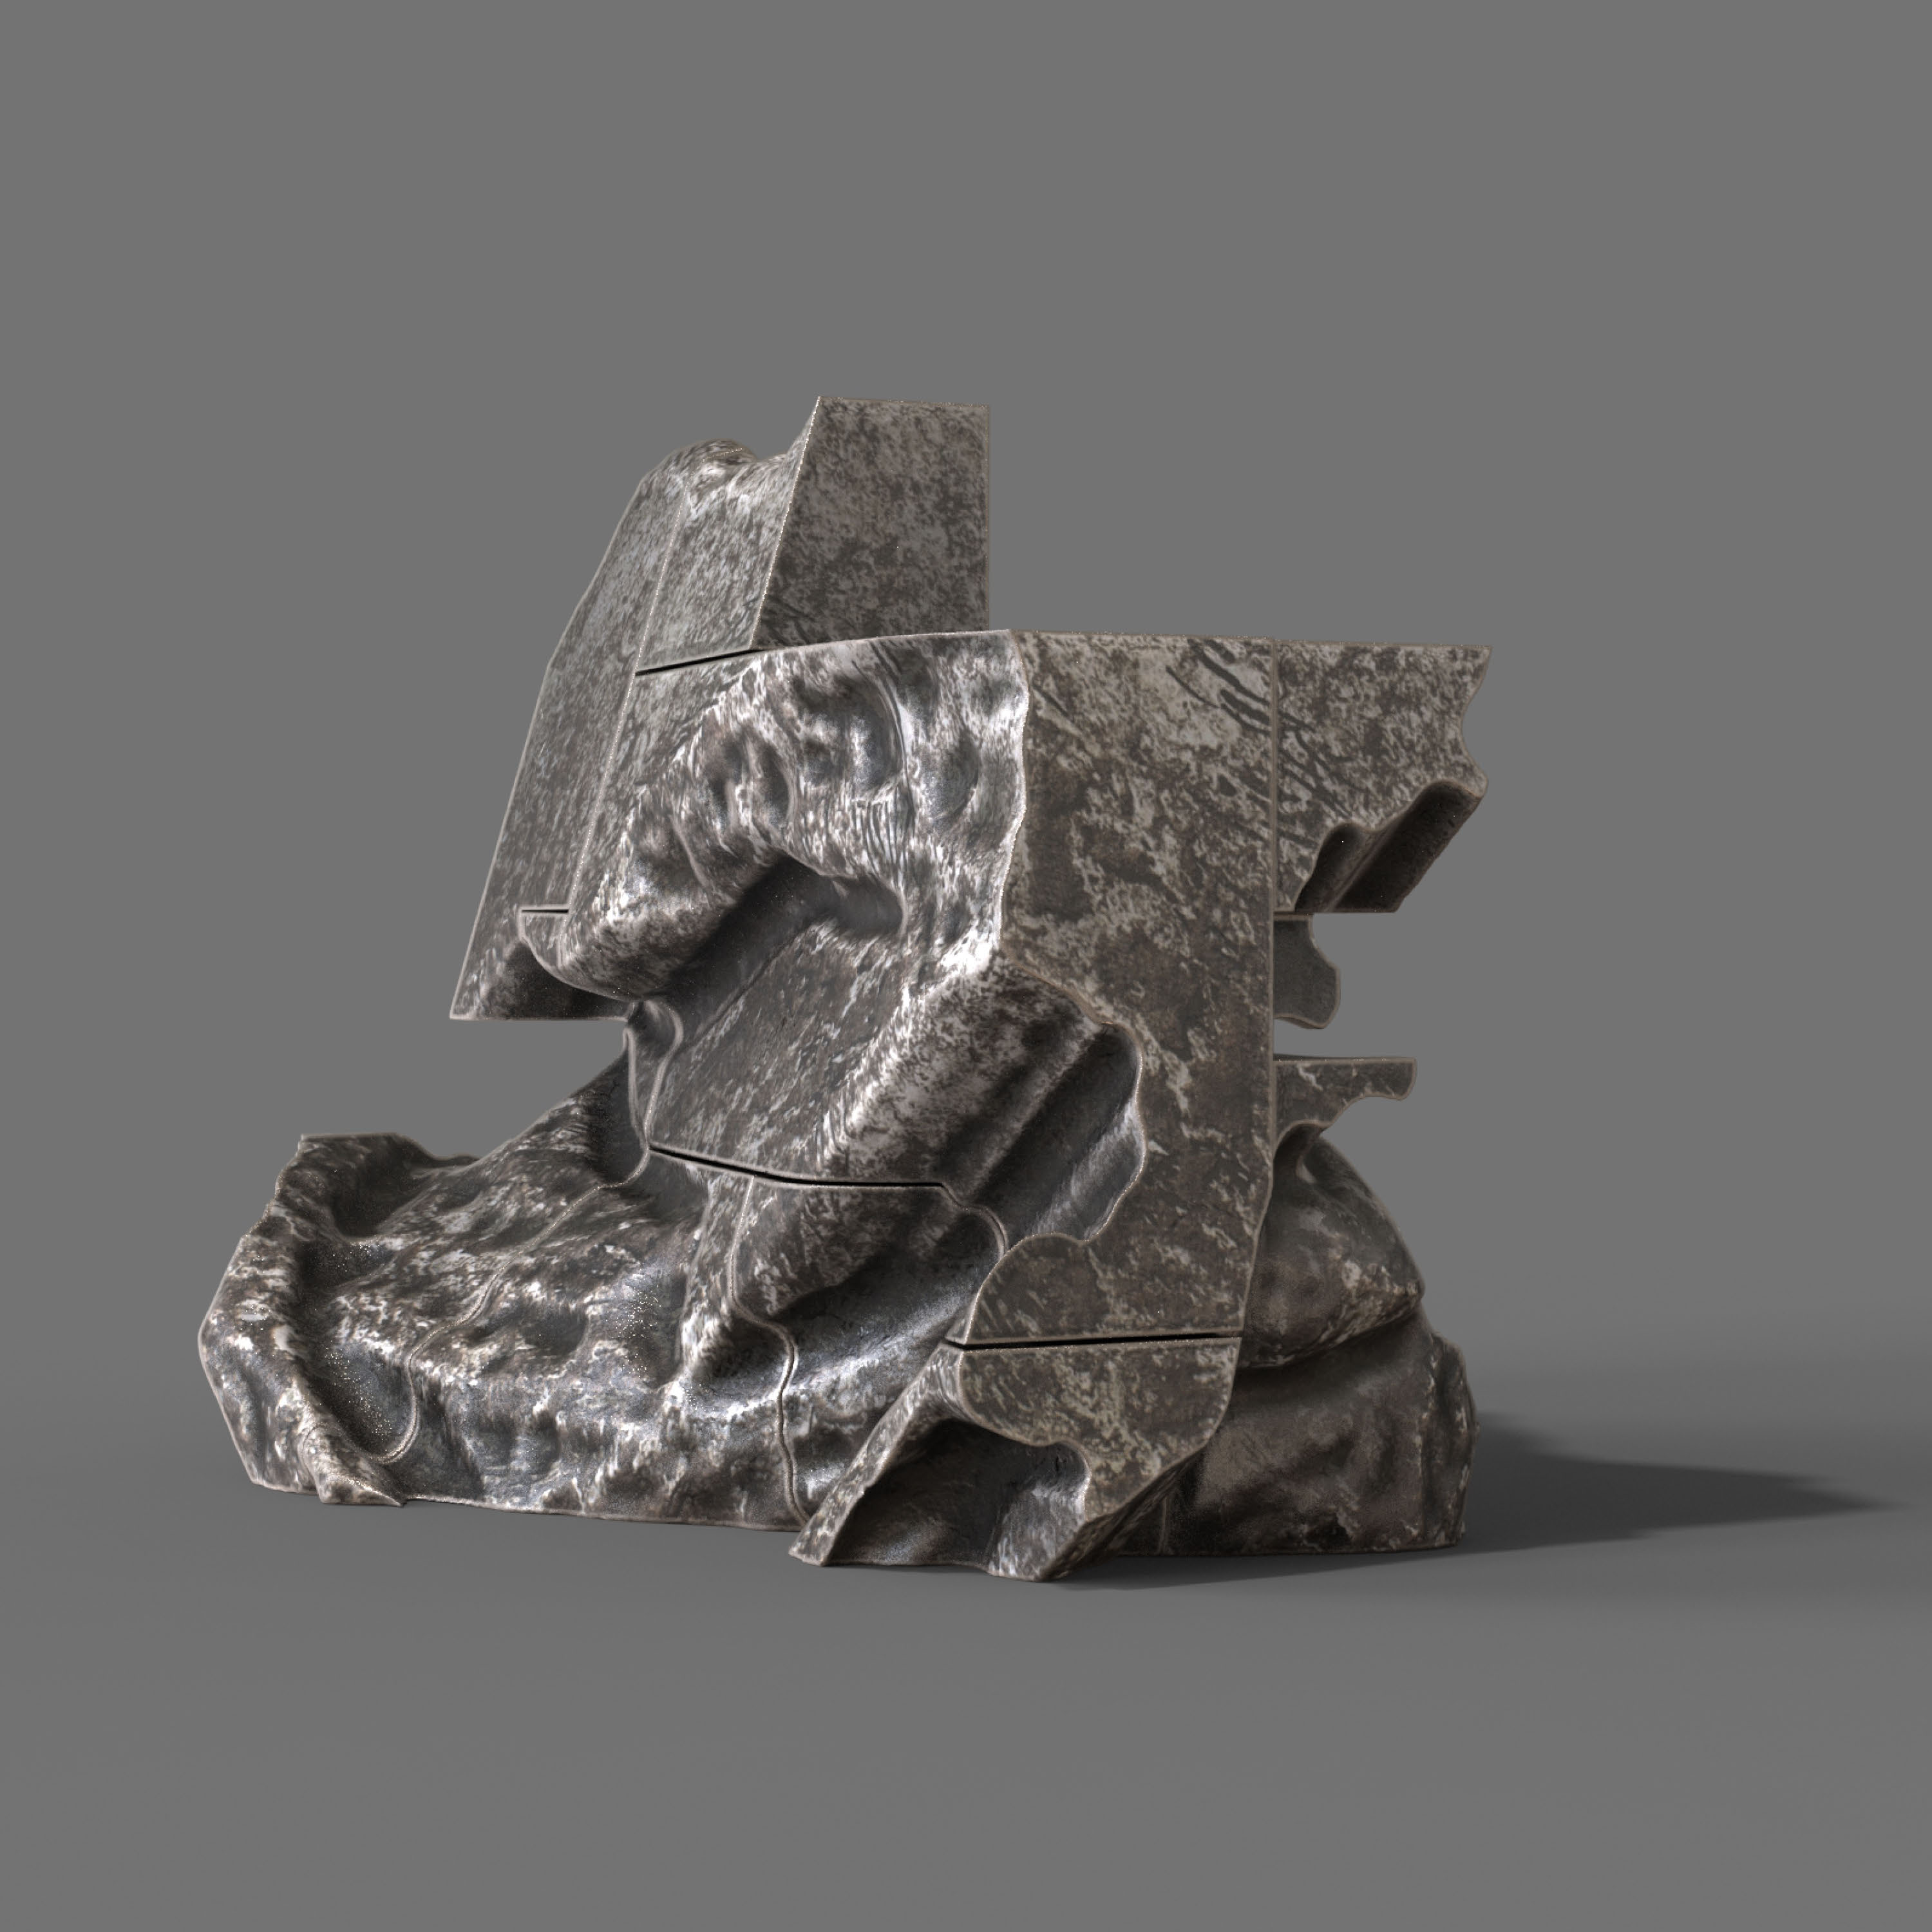 A complex computer-generated model made of stone against a grey background.